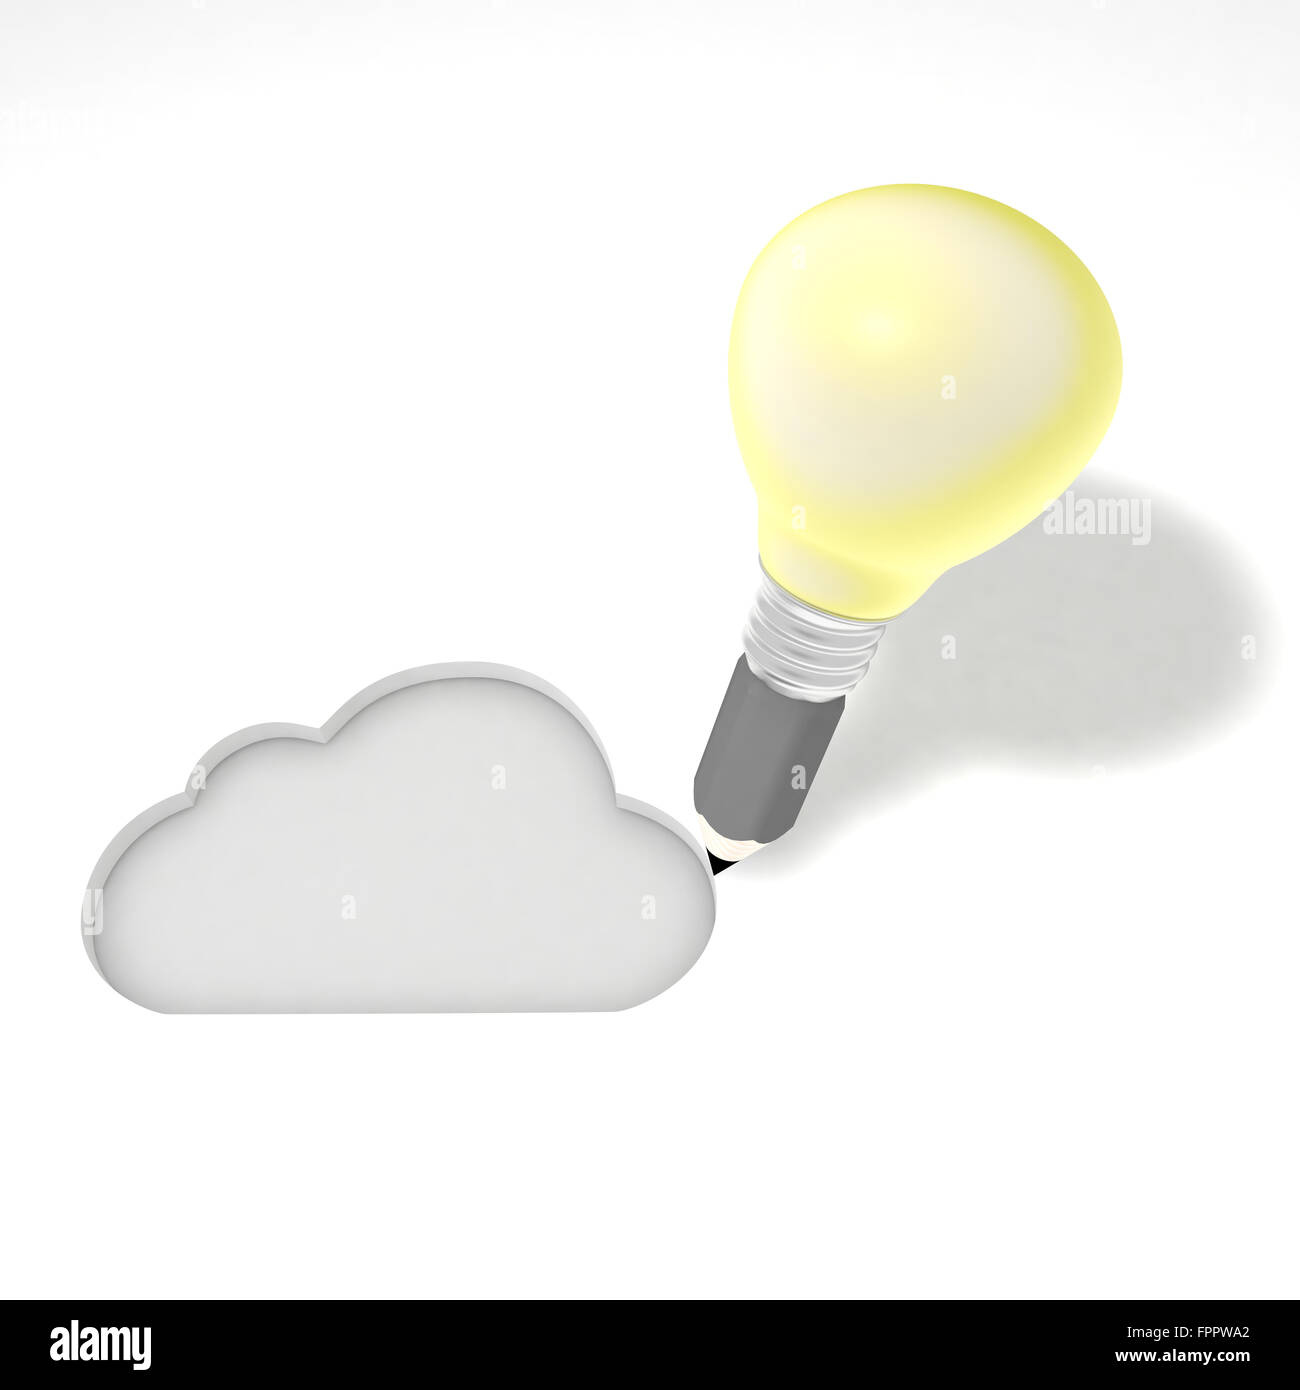 This illustration represents the conception of a internet cloud services. Stock Photo